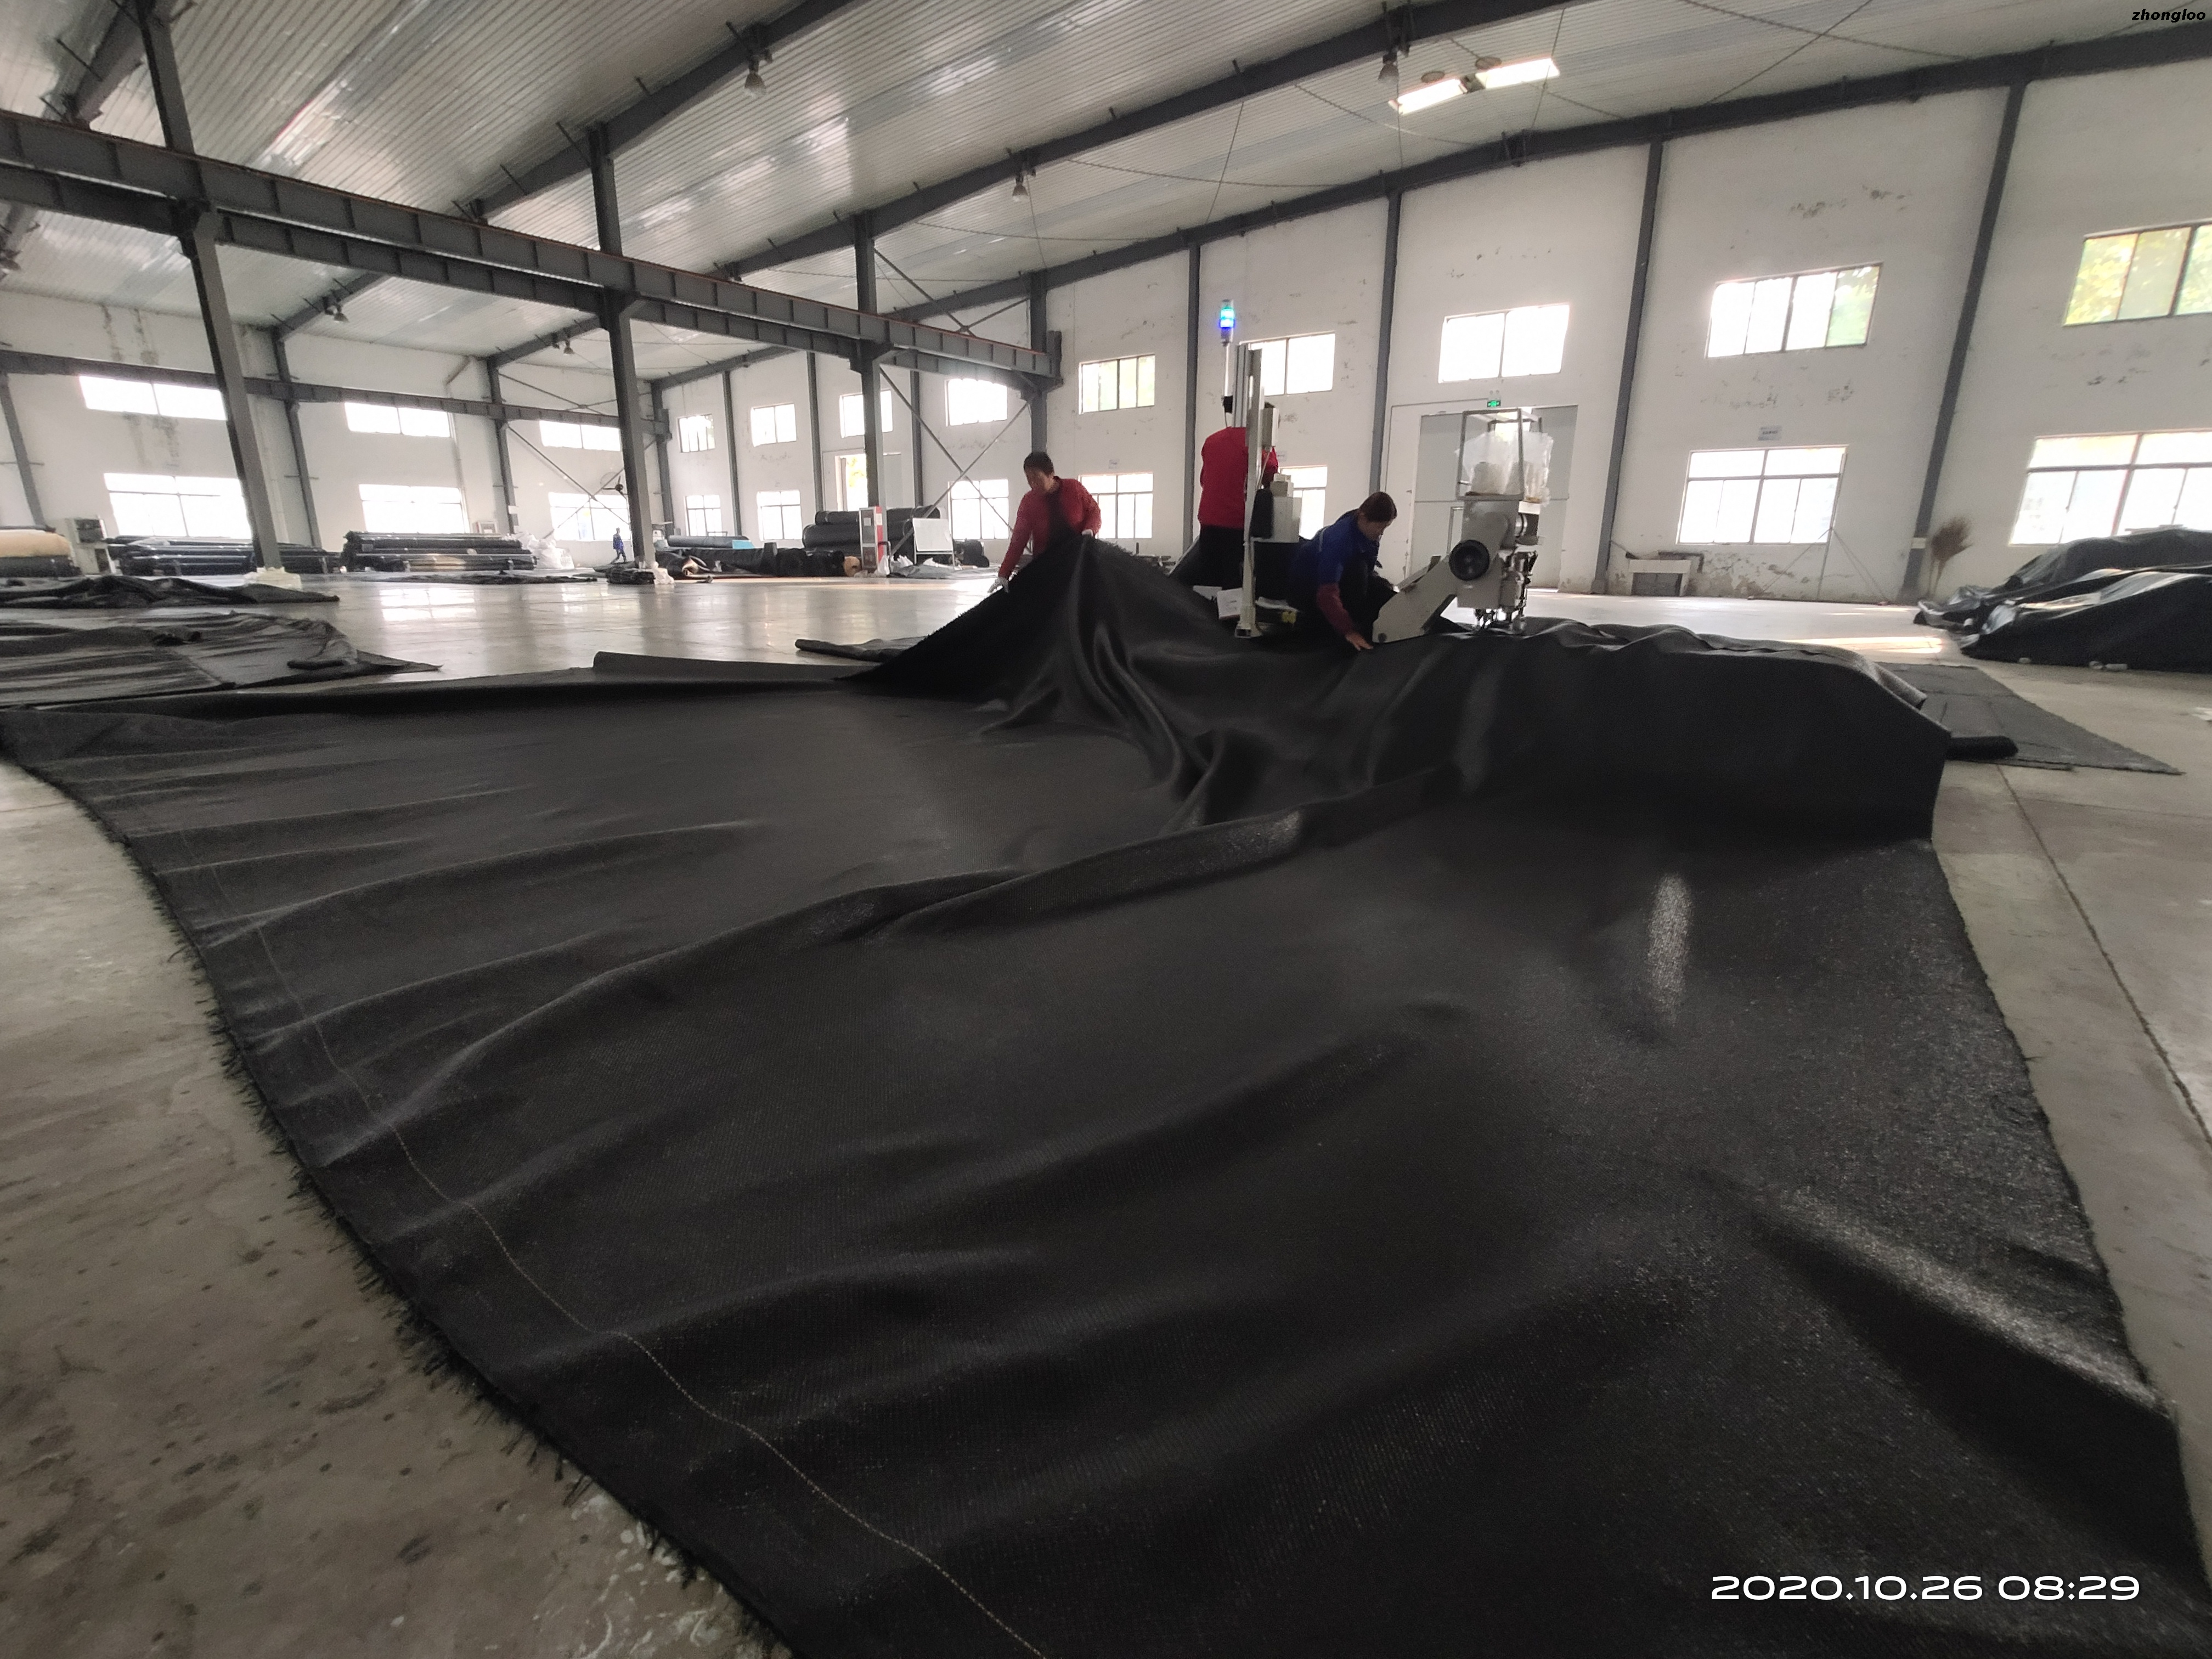 Geotextile Polpropylene Tubes Roll Geotube for Bank Protection Sand Bags for Flood